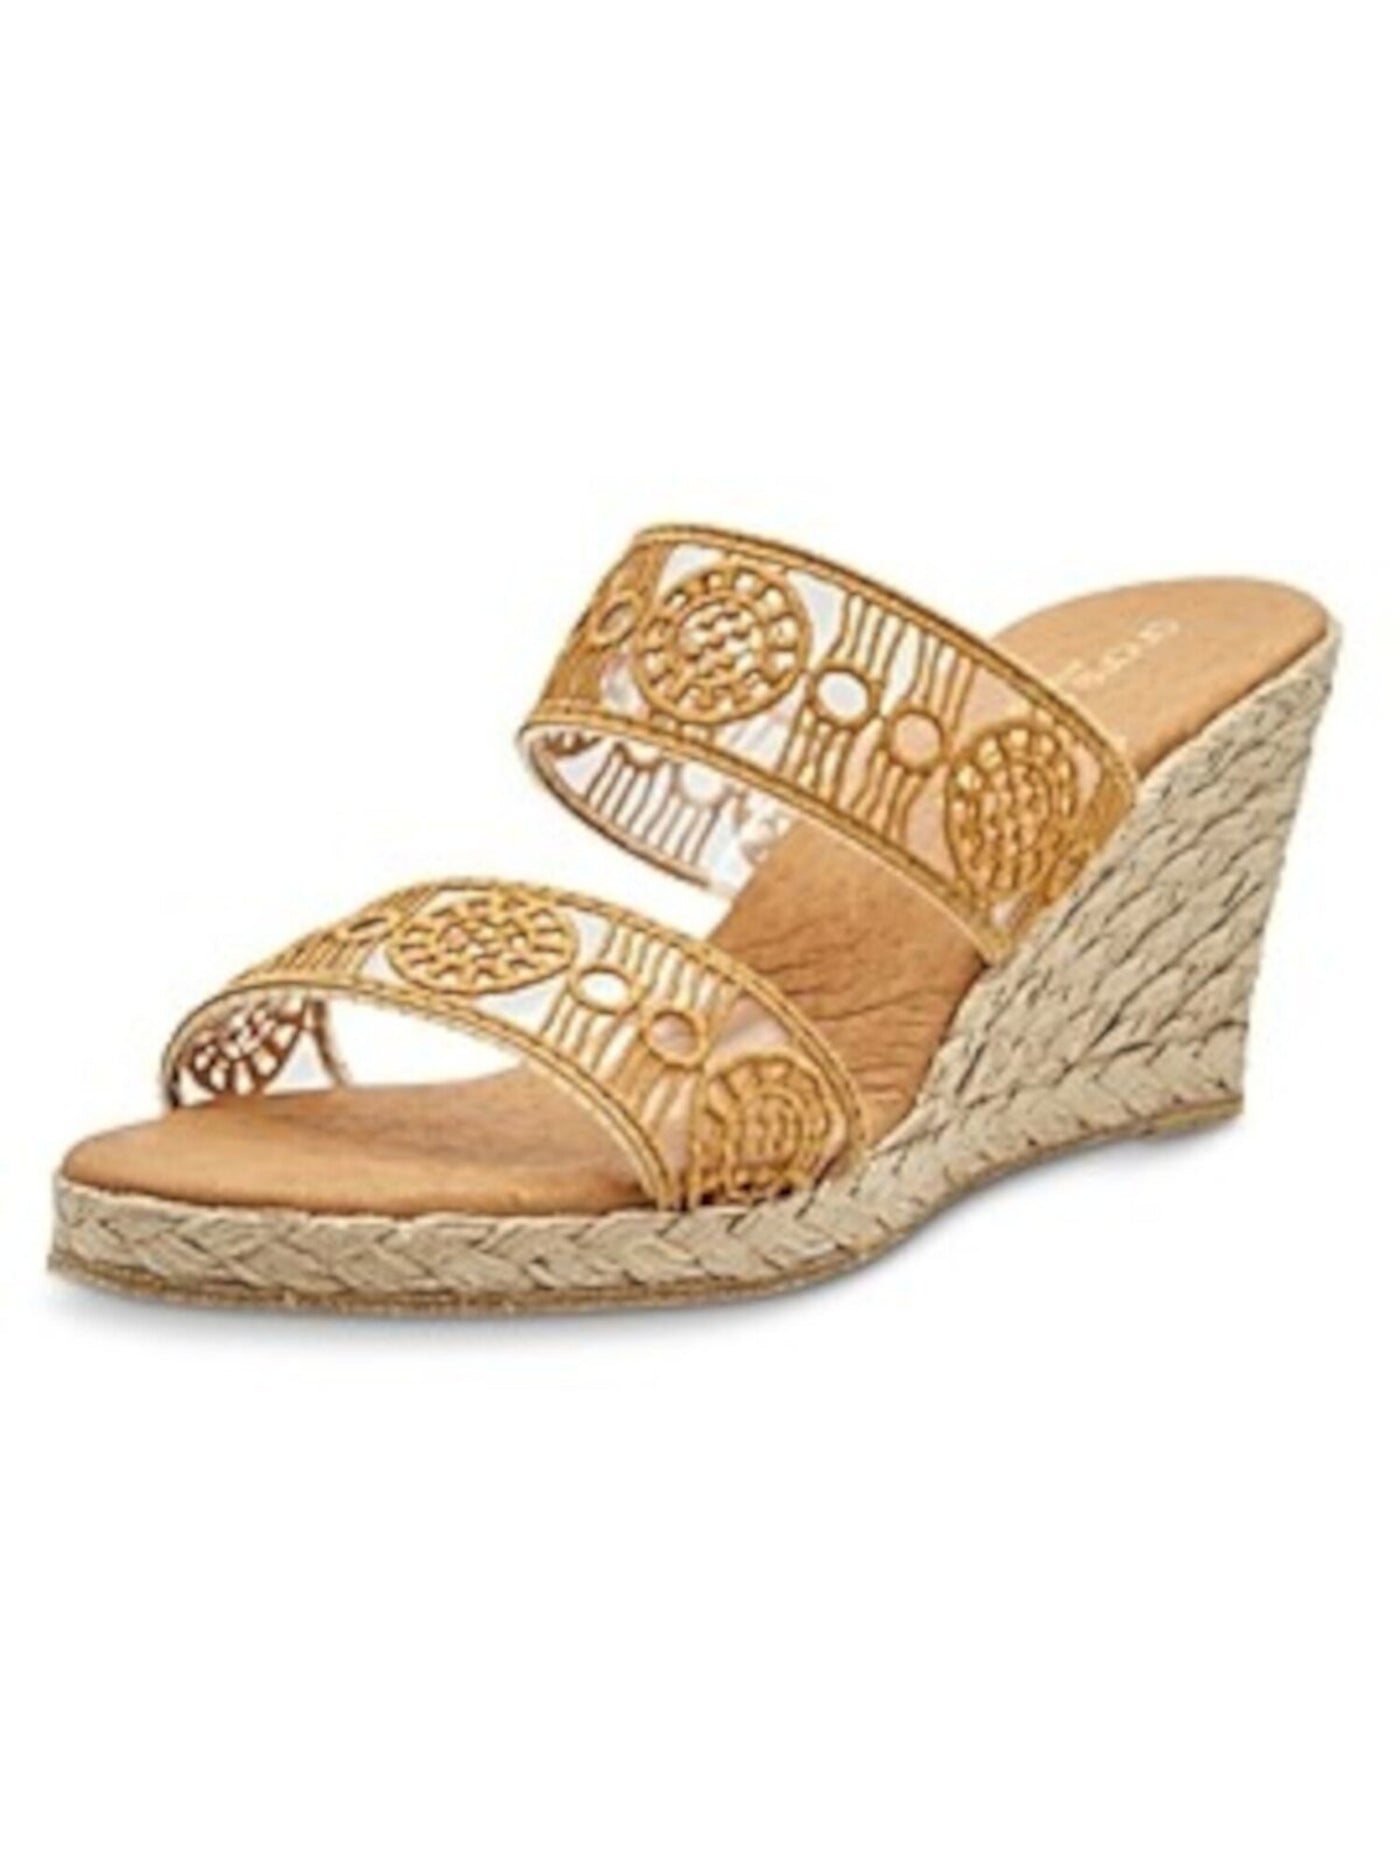 ANDRE ASSOUS Womens Gold Geometric Strappy Cushioned Anja Round Toe Wedge Slip On Leather Espadrille Shoes 39